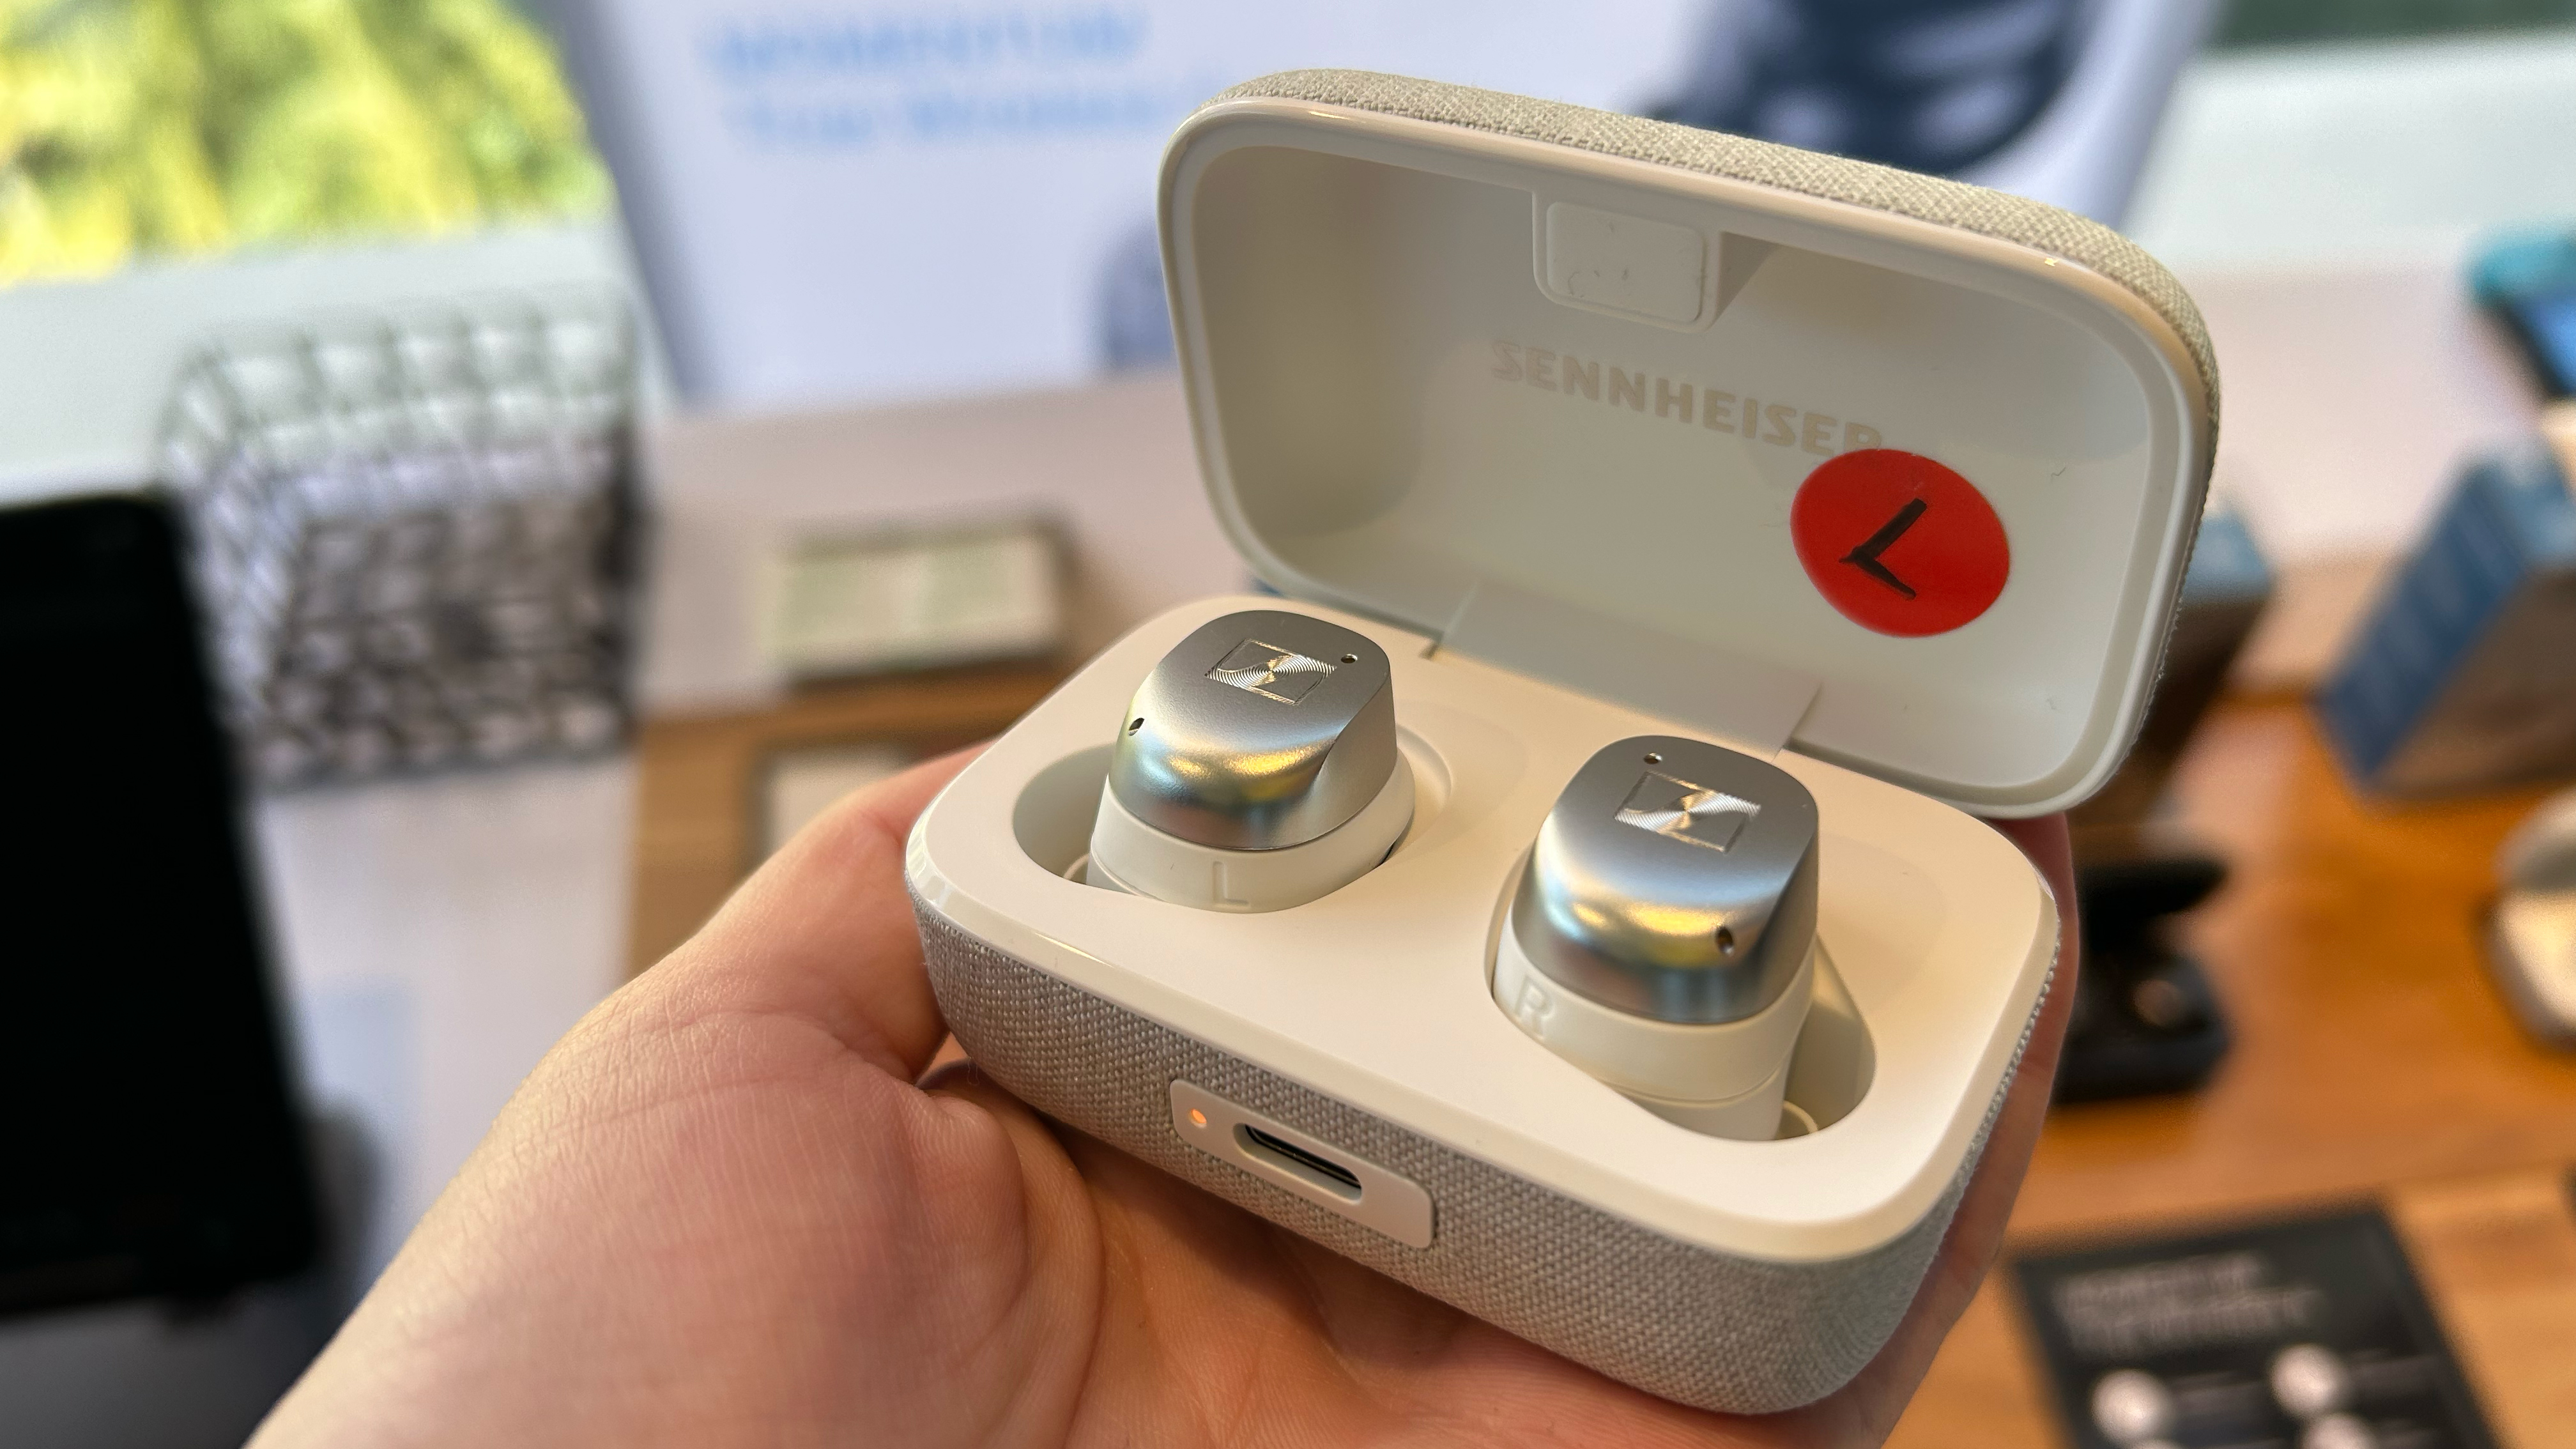 Sennheiser Momentum 4 true wireless earbuds in their case, held in a hand at a trade show